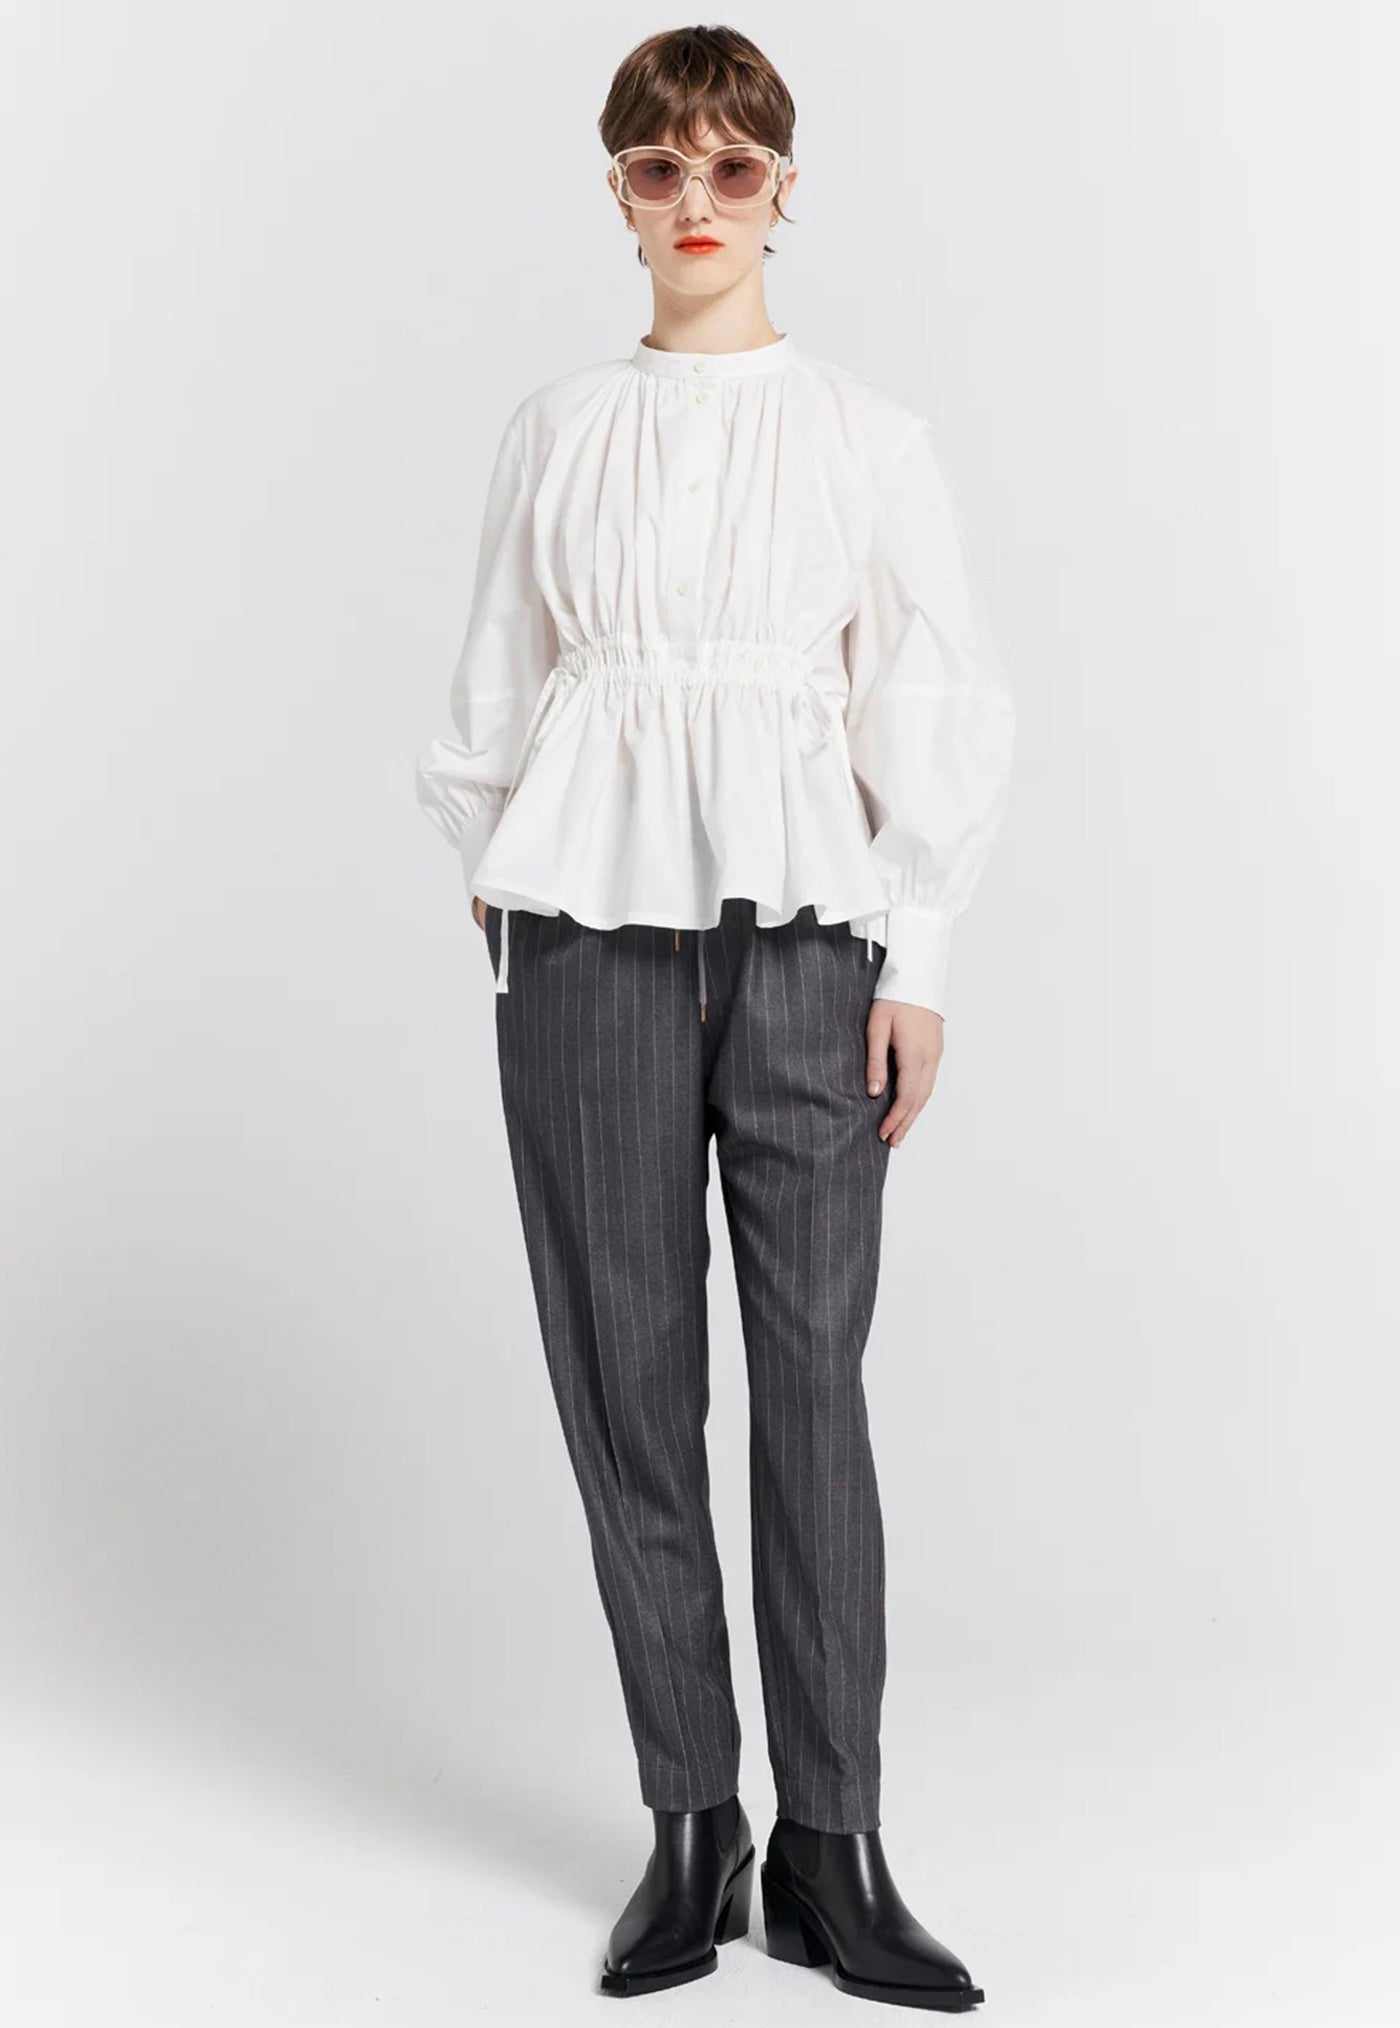 Nico Trousers - Charcoal Pinstripe sold by Angel Divine